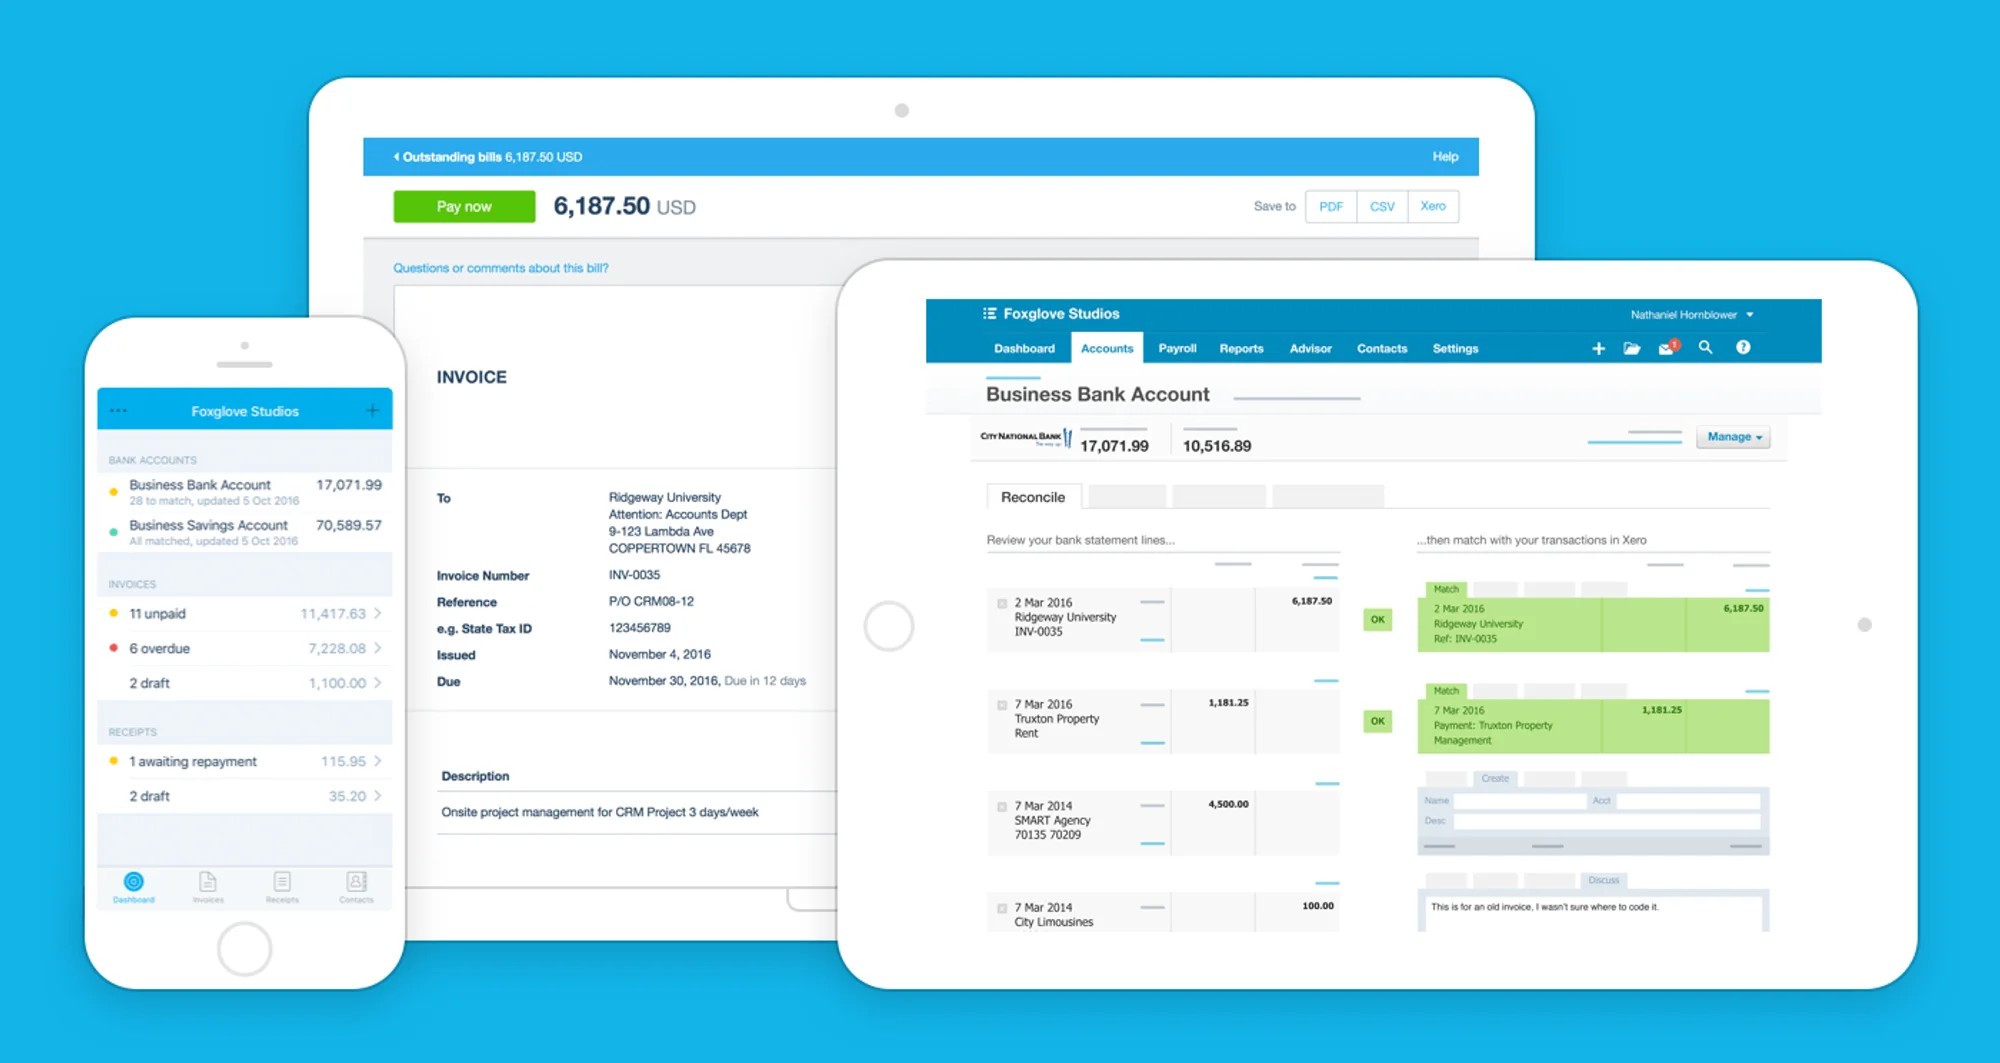 When it comes to account Xero is simply the best